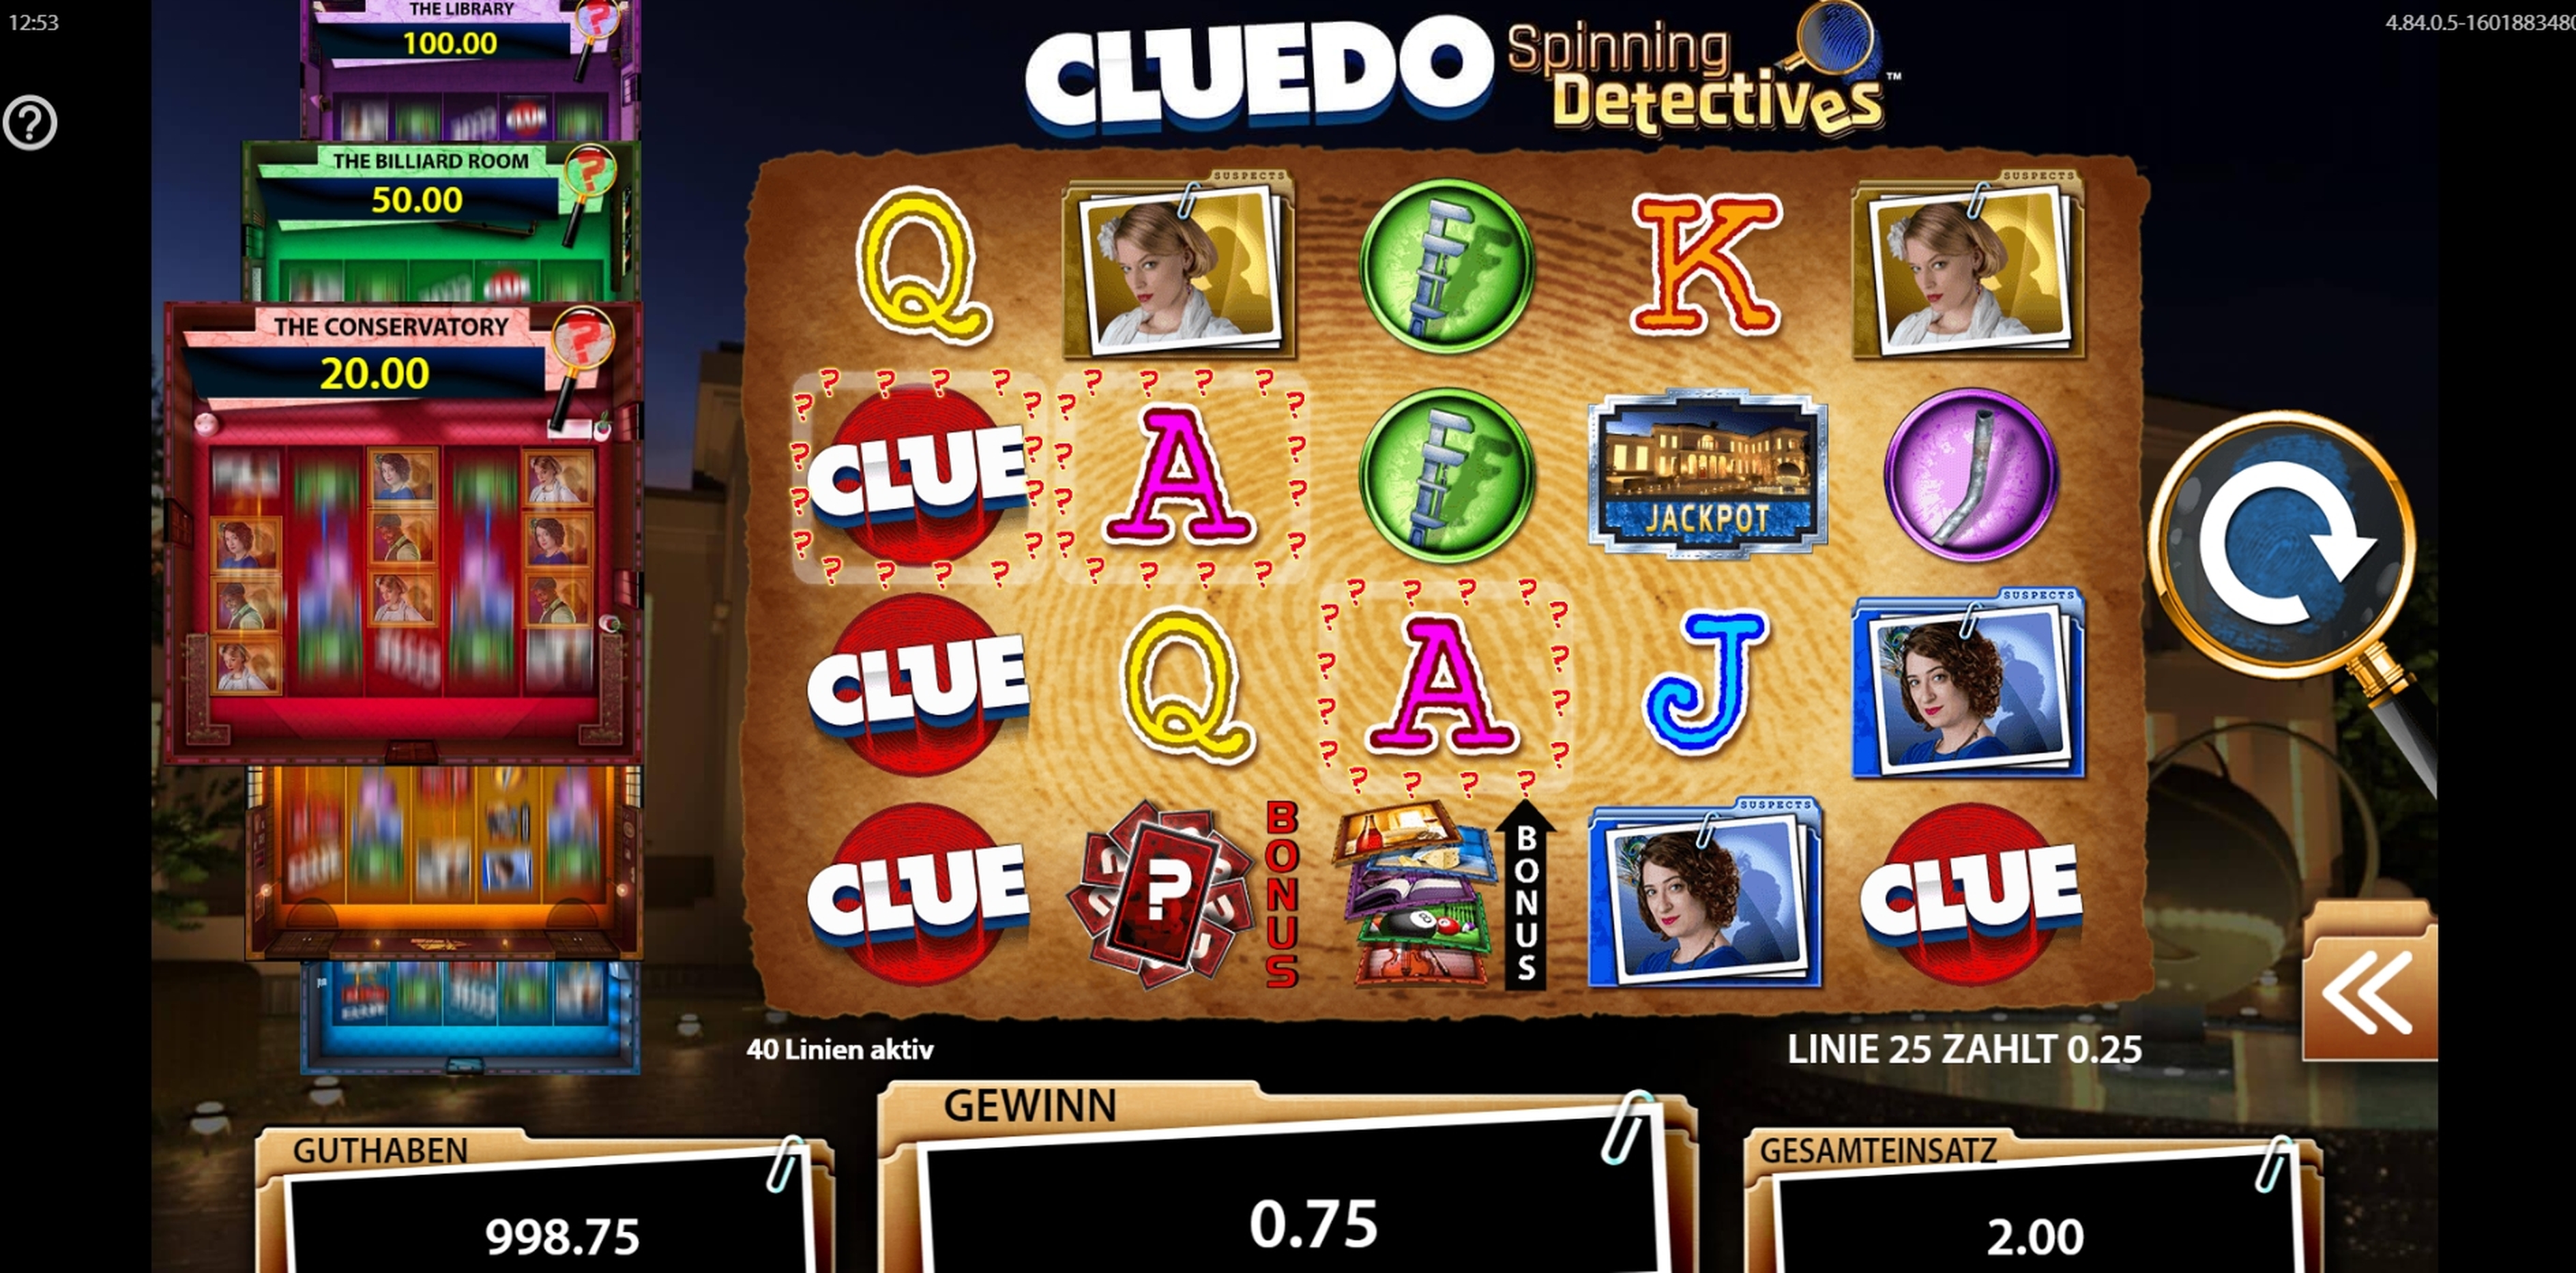 Win Money in CLUEDO Spinning Detectives Free Slot Game by WMS